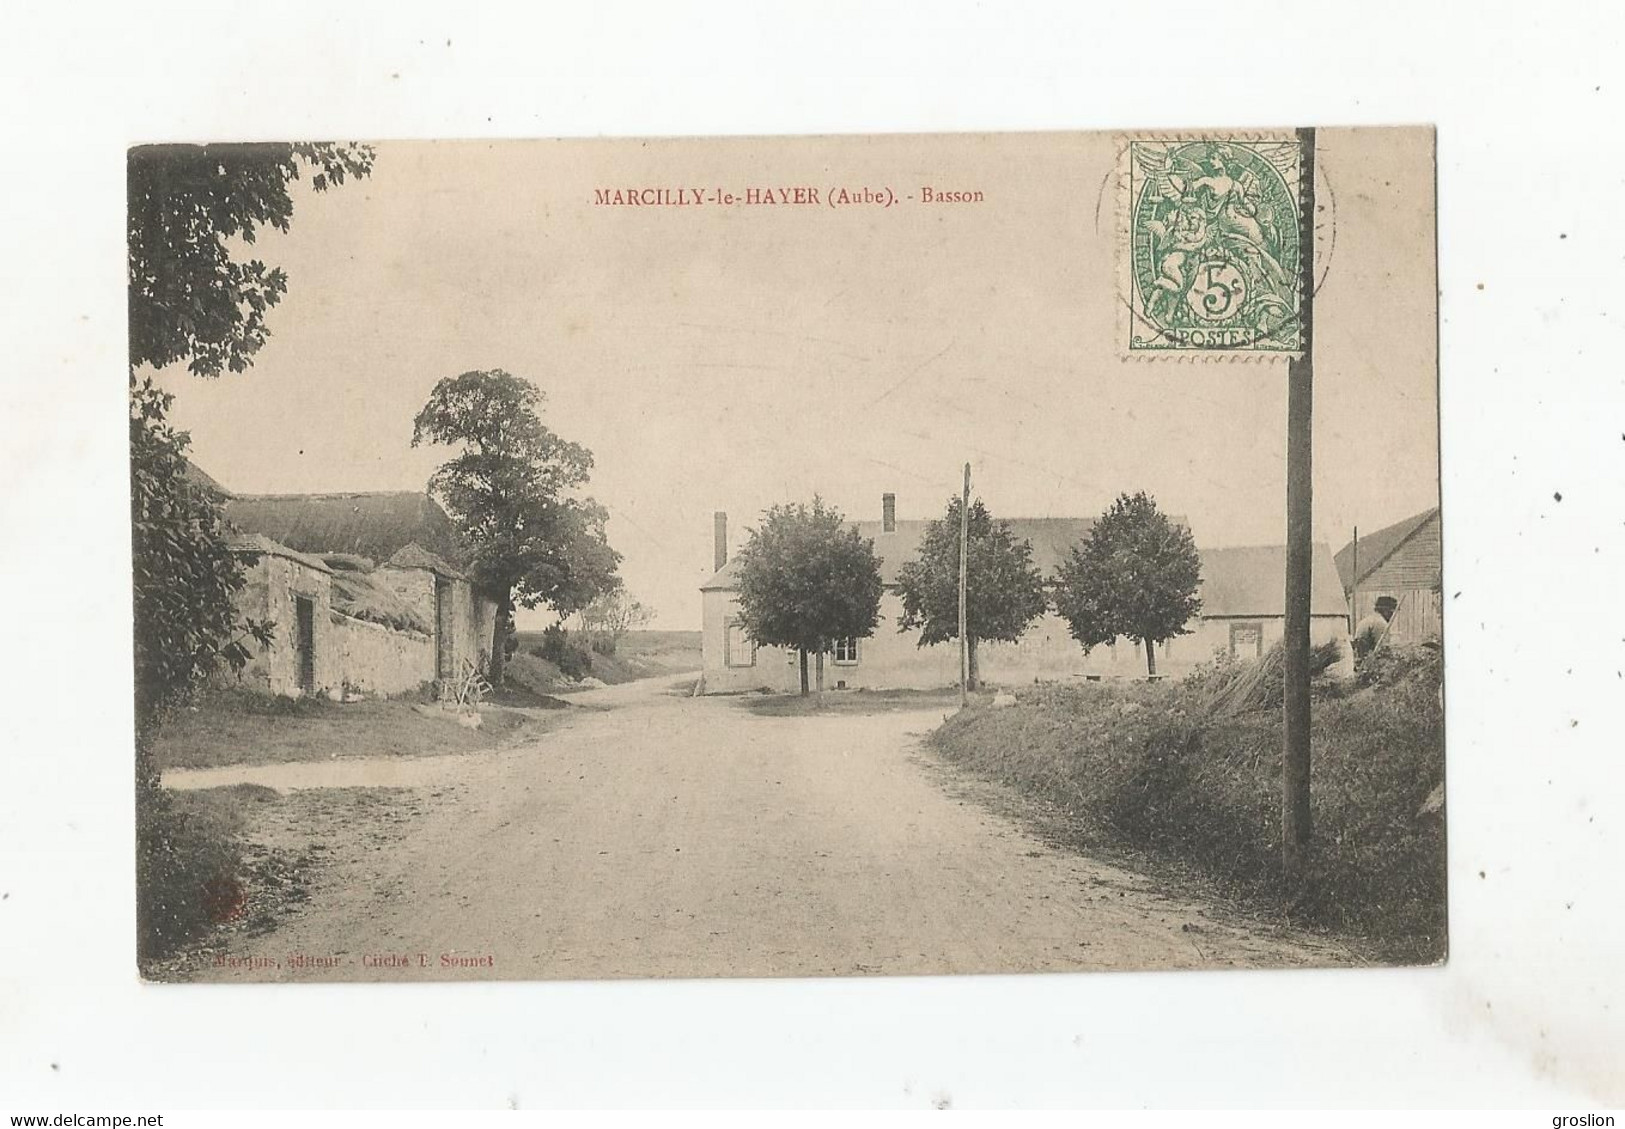 MARCILLY LE HAYER (AUBE) BASSON 1907 - Marcilly